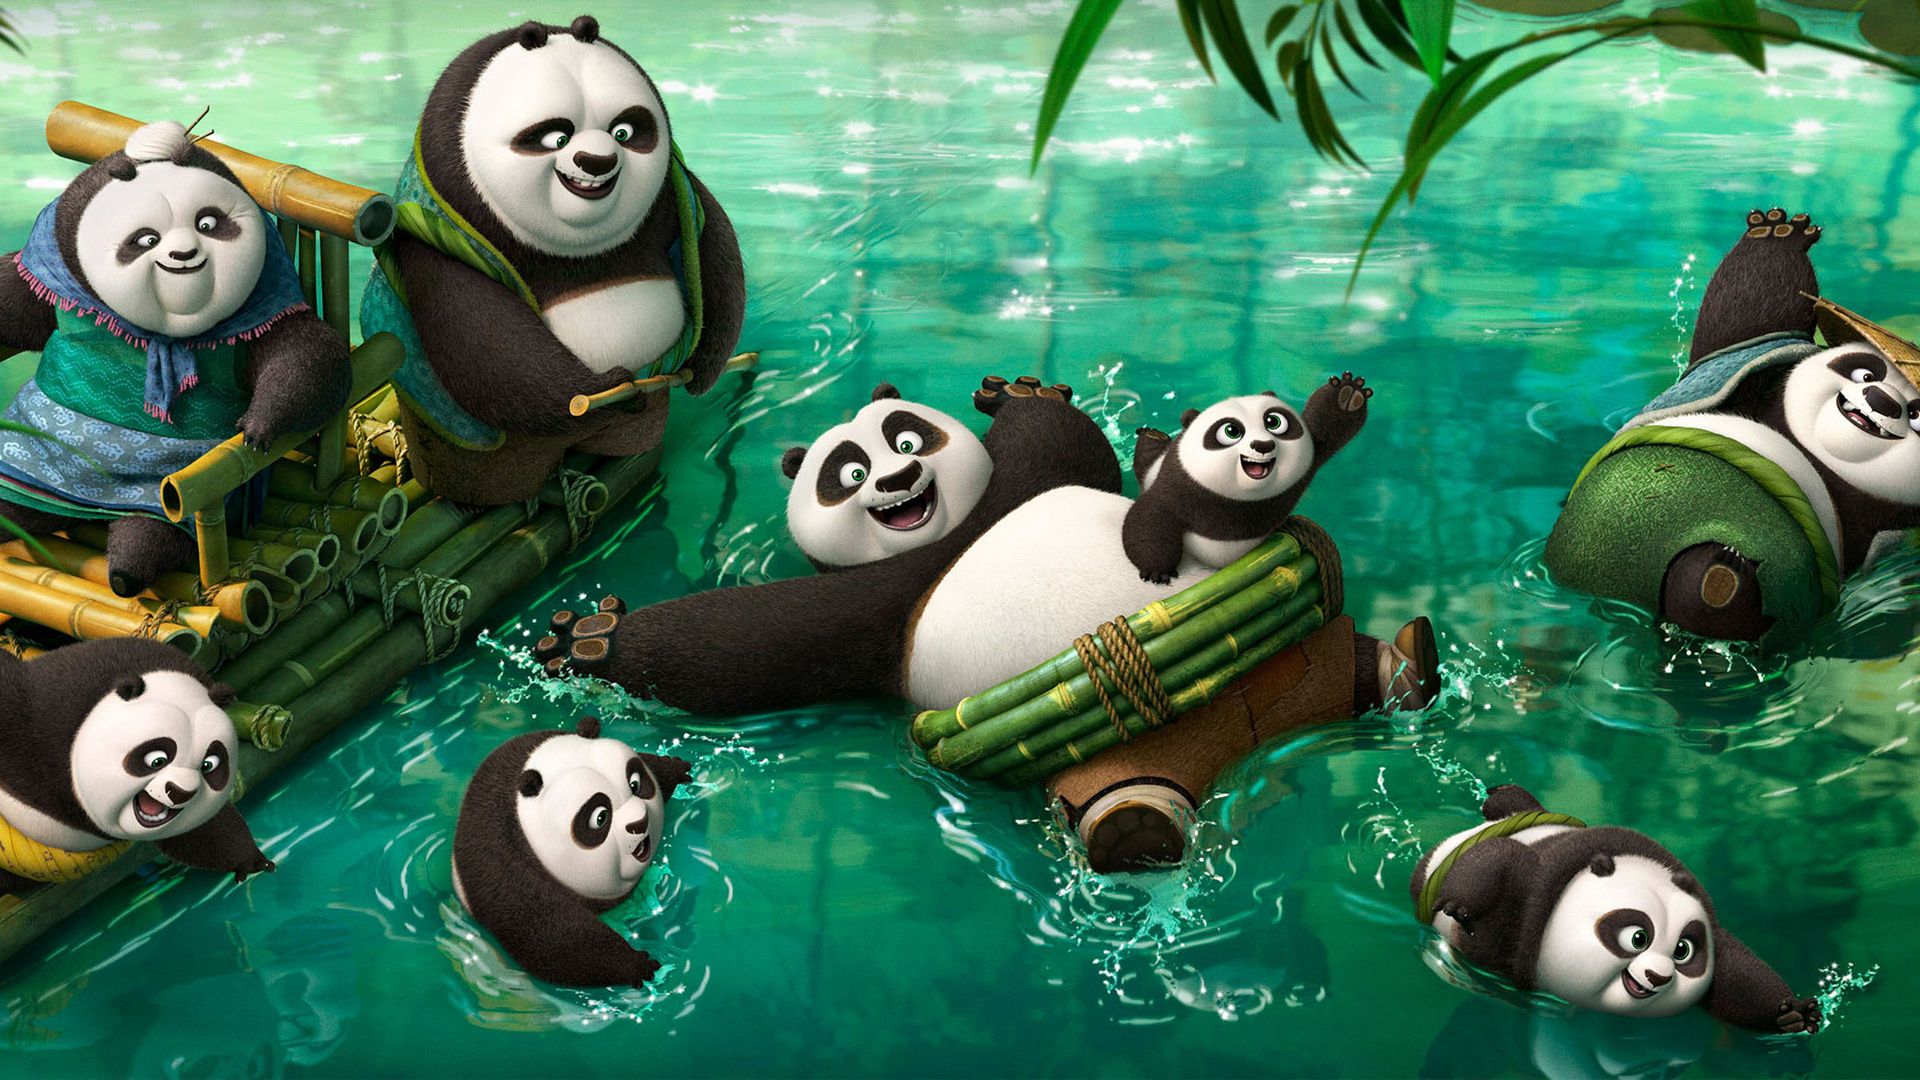 Pandas 4K wallpaper for your desktop or mobile screen free and easy to download